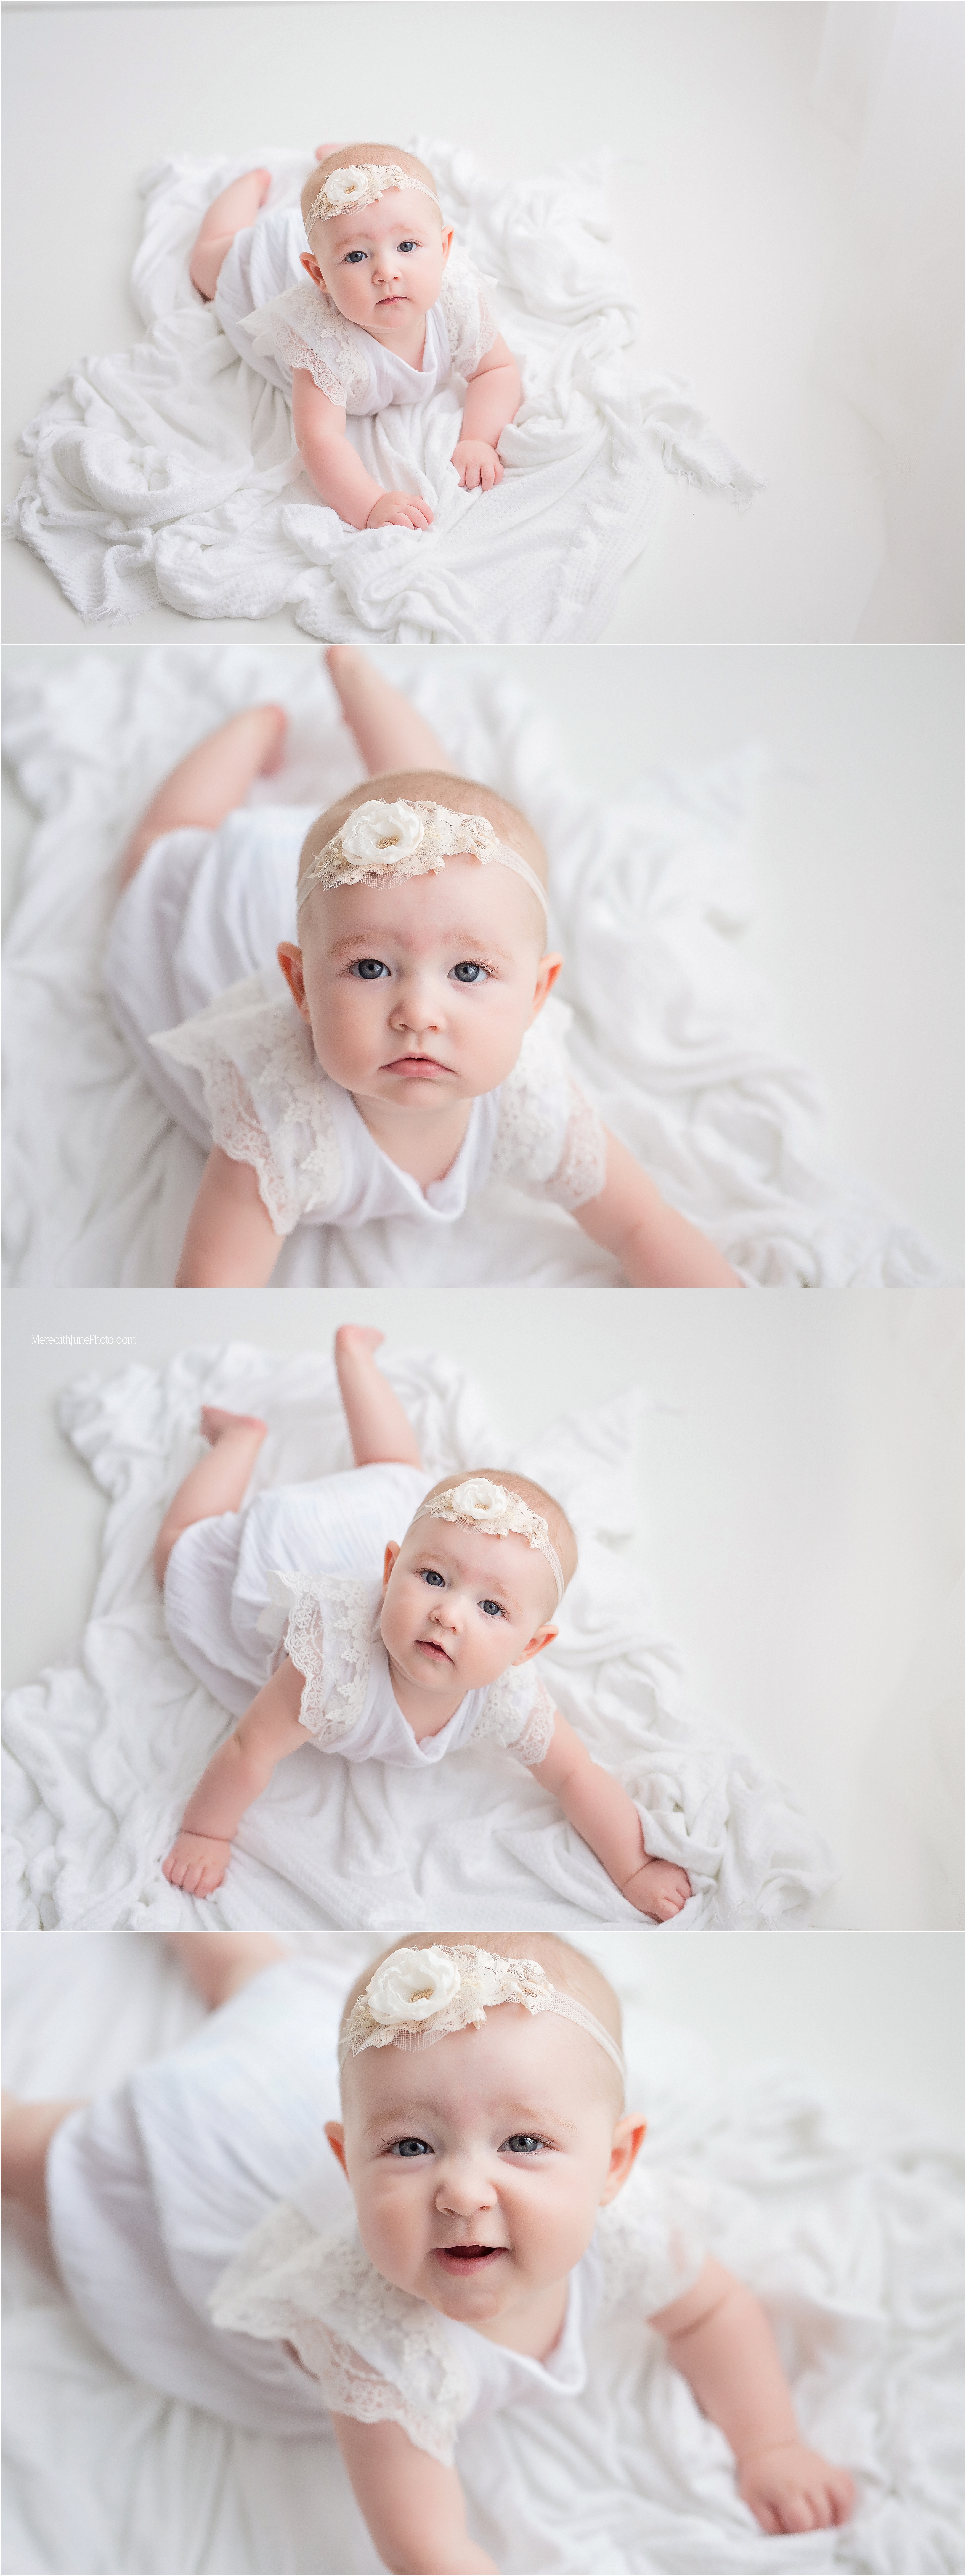 6 month photo session at Meredith June Photography